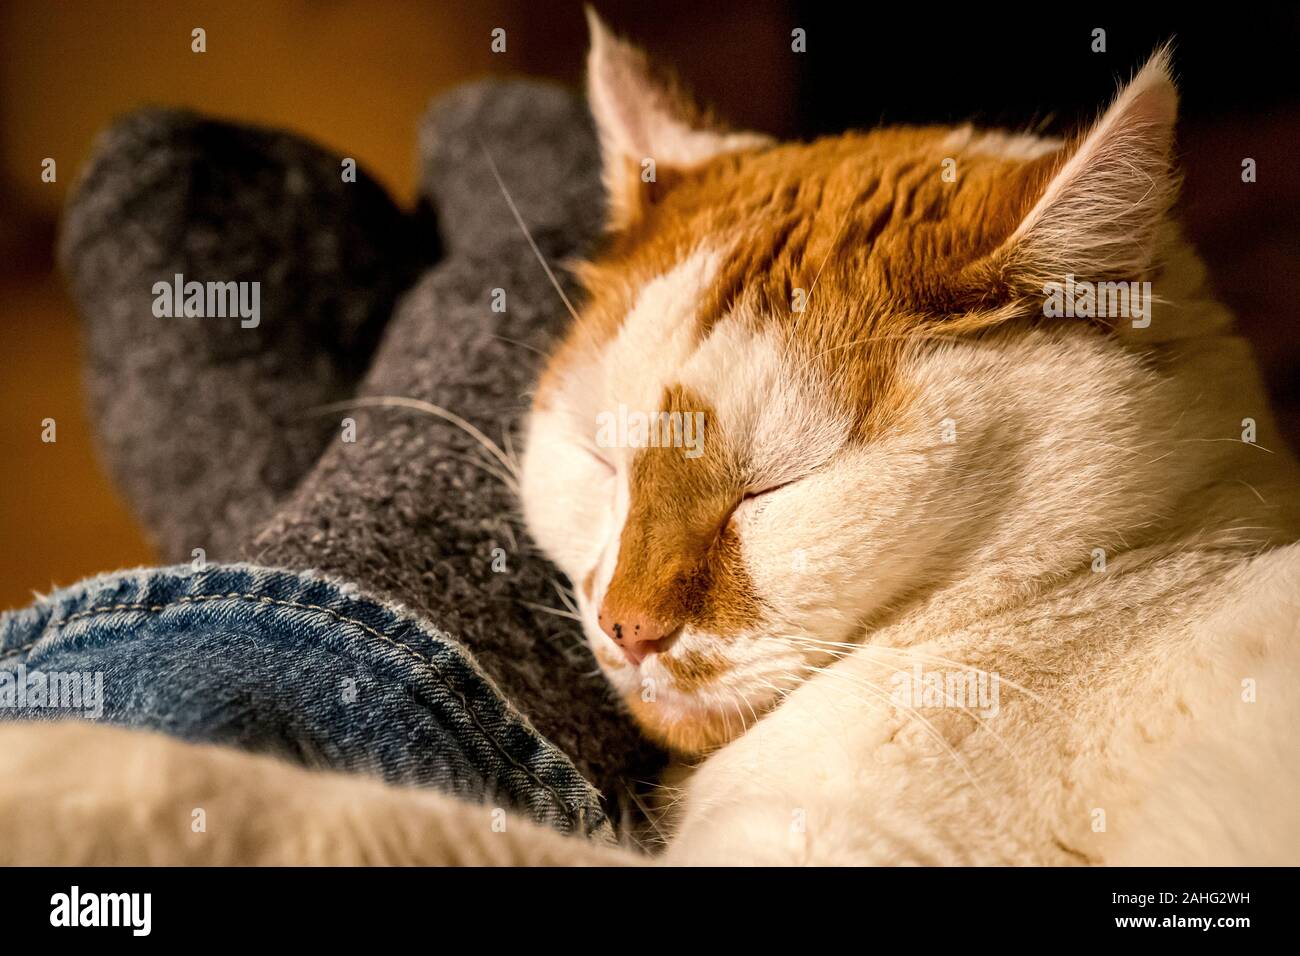 A contented white and orange cat sleeping on its owner's feet Stock Photo